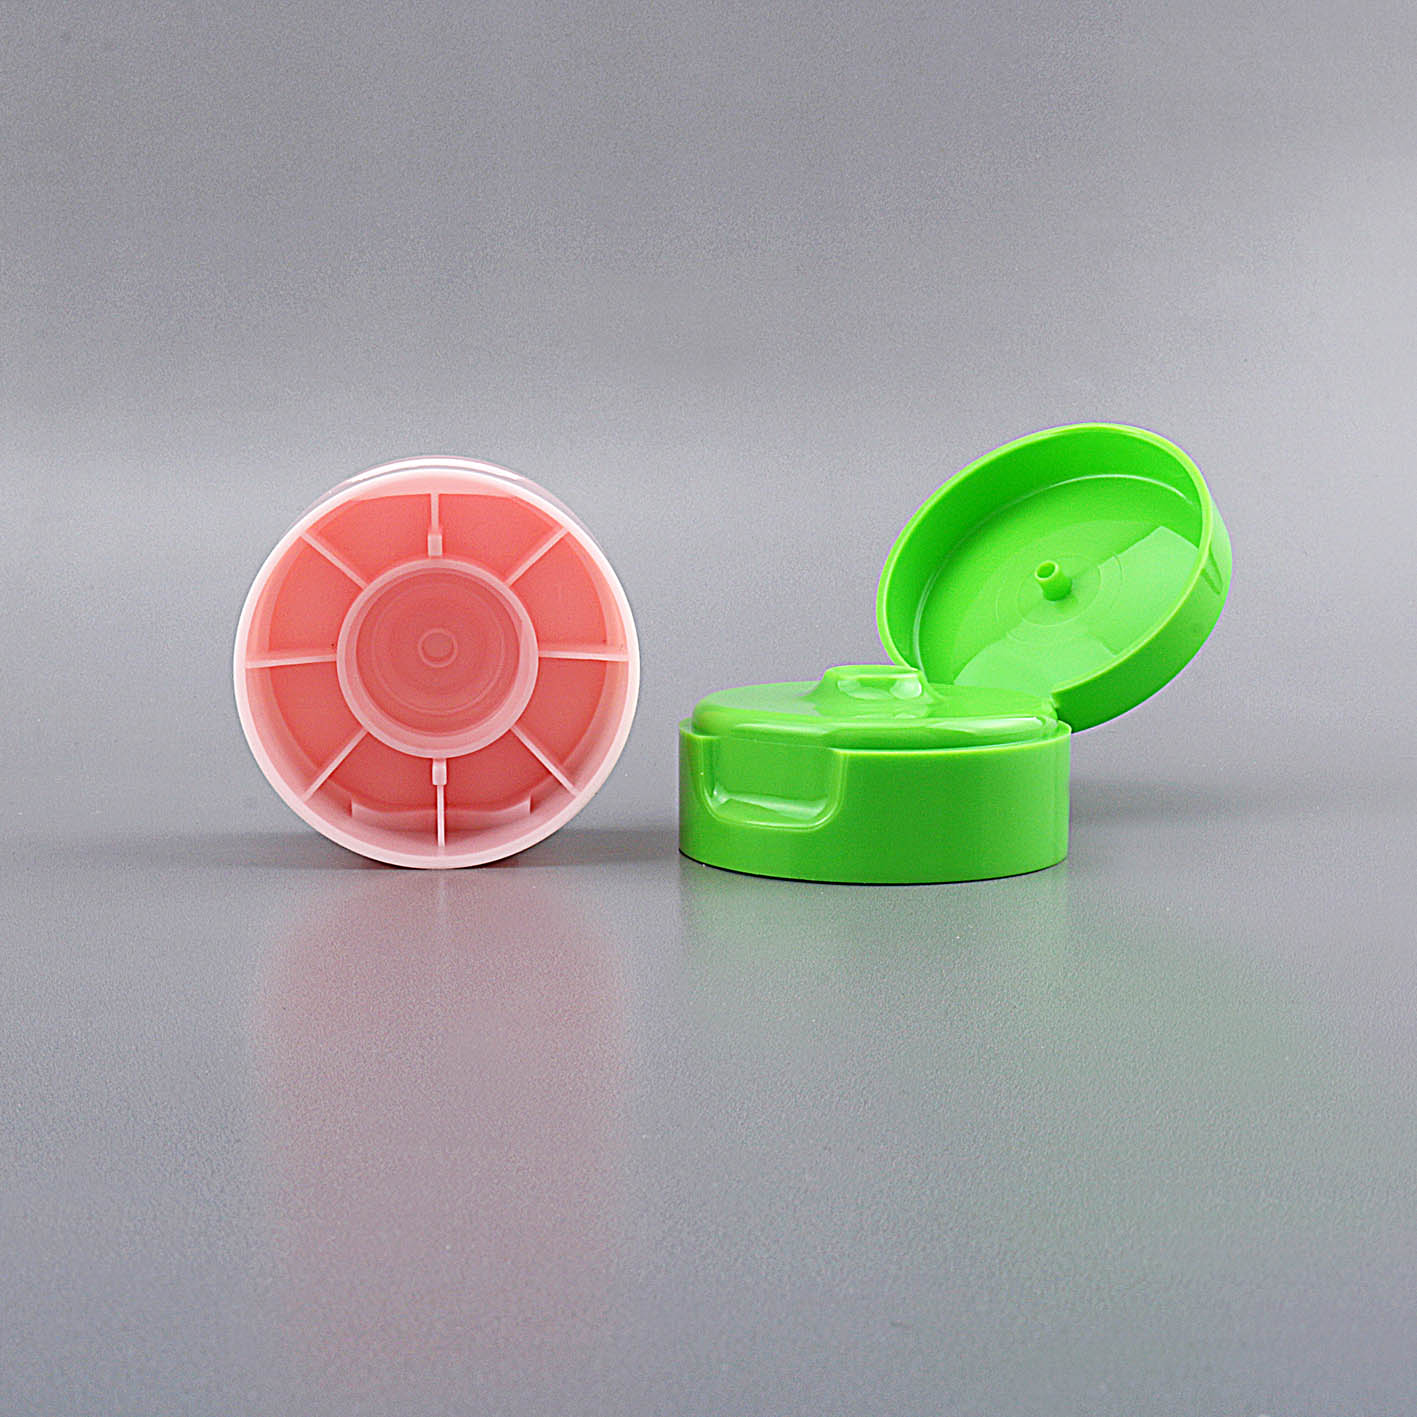 50mm_Diameter_Customized_Shampoo_Tubes_with_Glossy_Flip_Top_Caps4